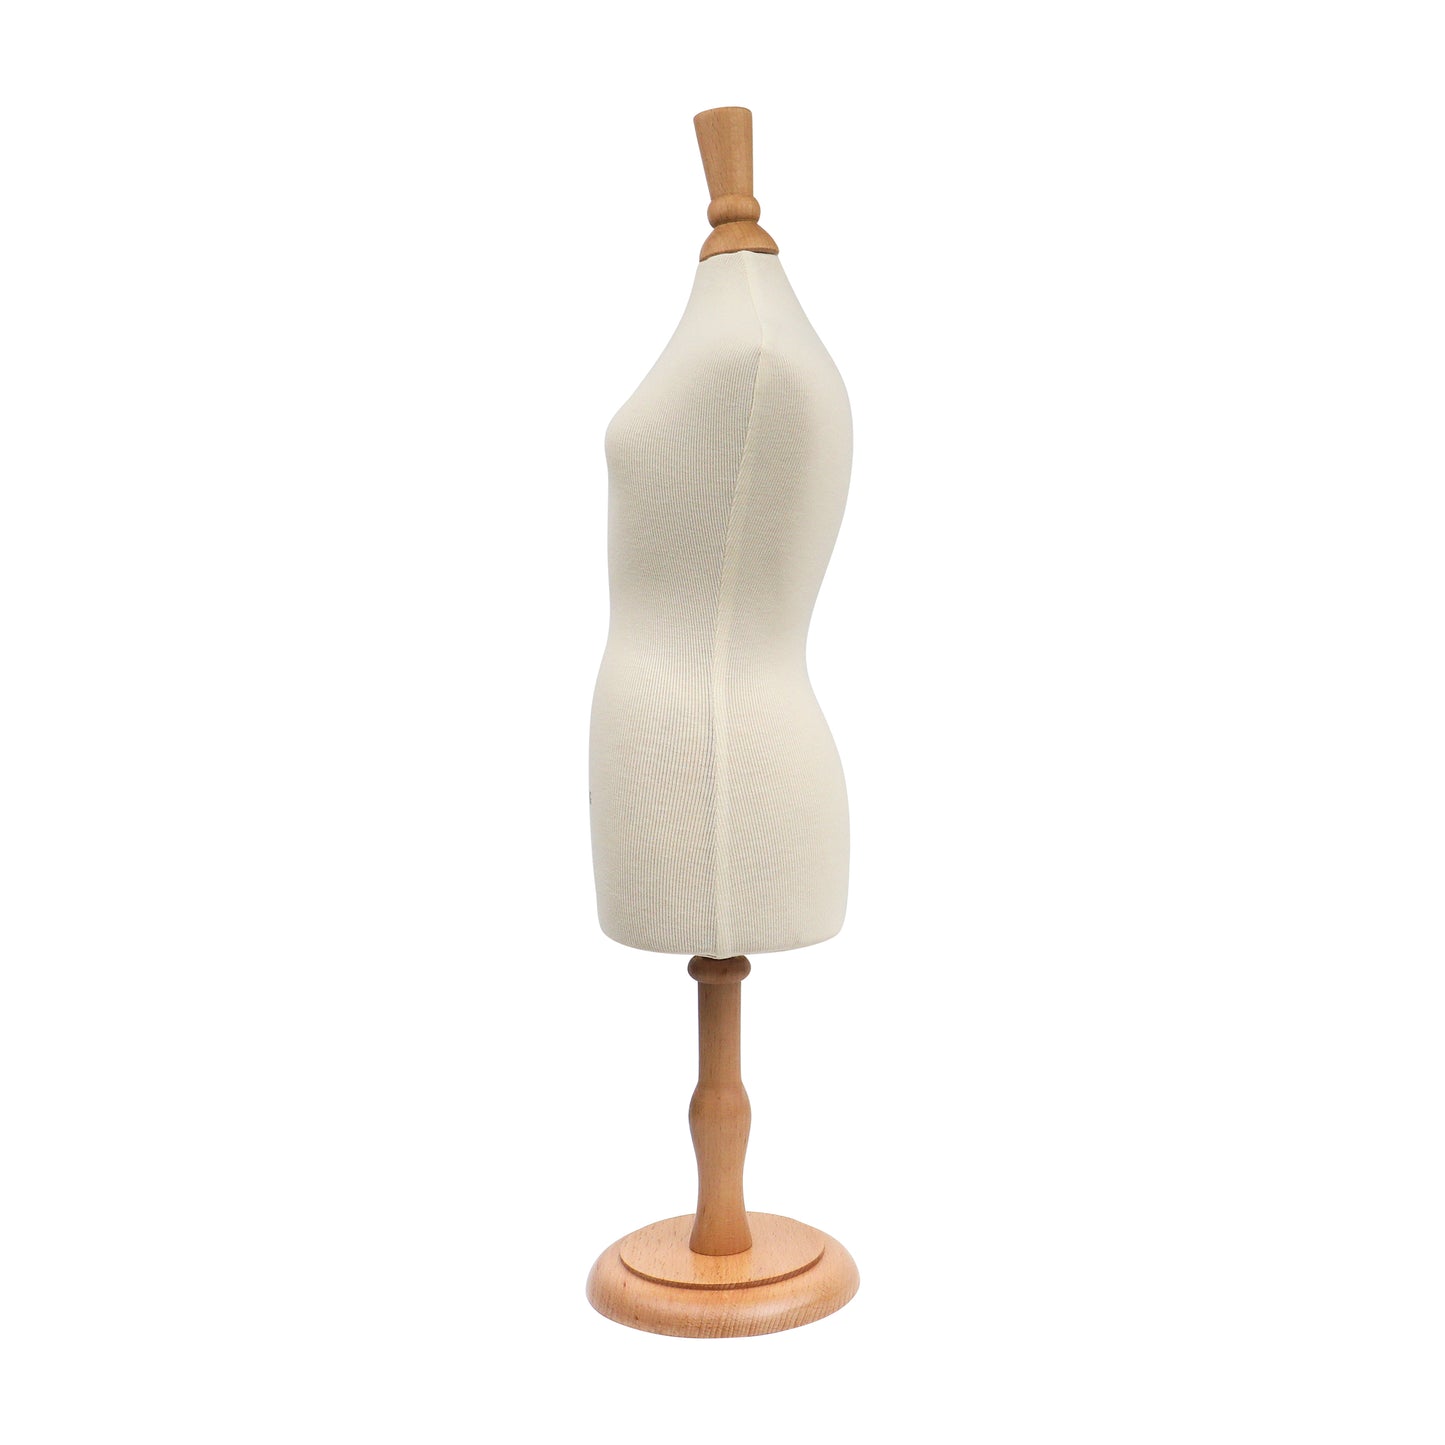 DE-LIANG Clearance Sales half scale mini dress form mannequin for sewing, clothing female torso mannequin, dressmaker dummy fully pin foam pattern DE-LIANG